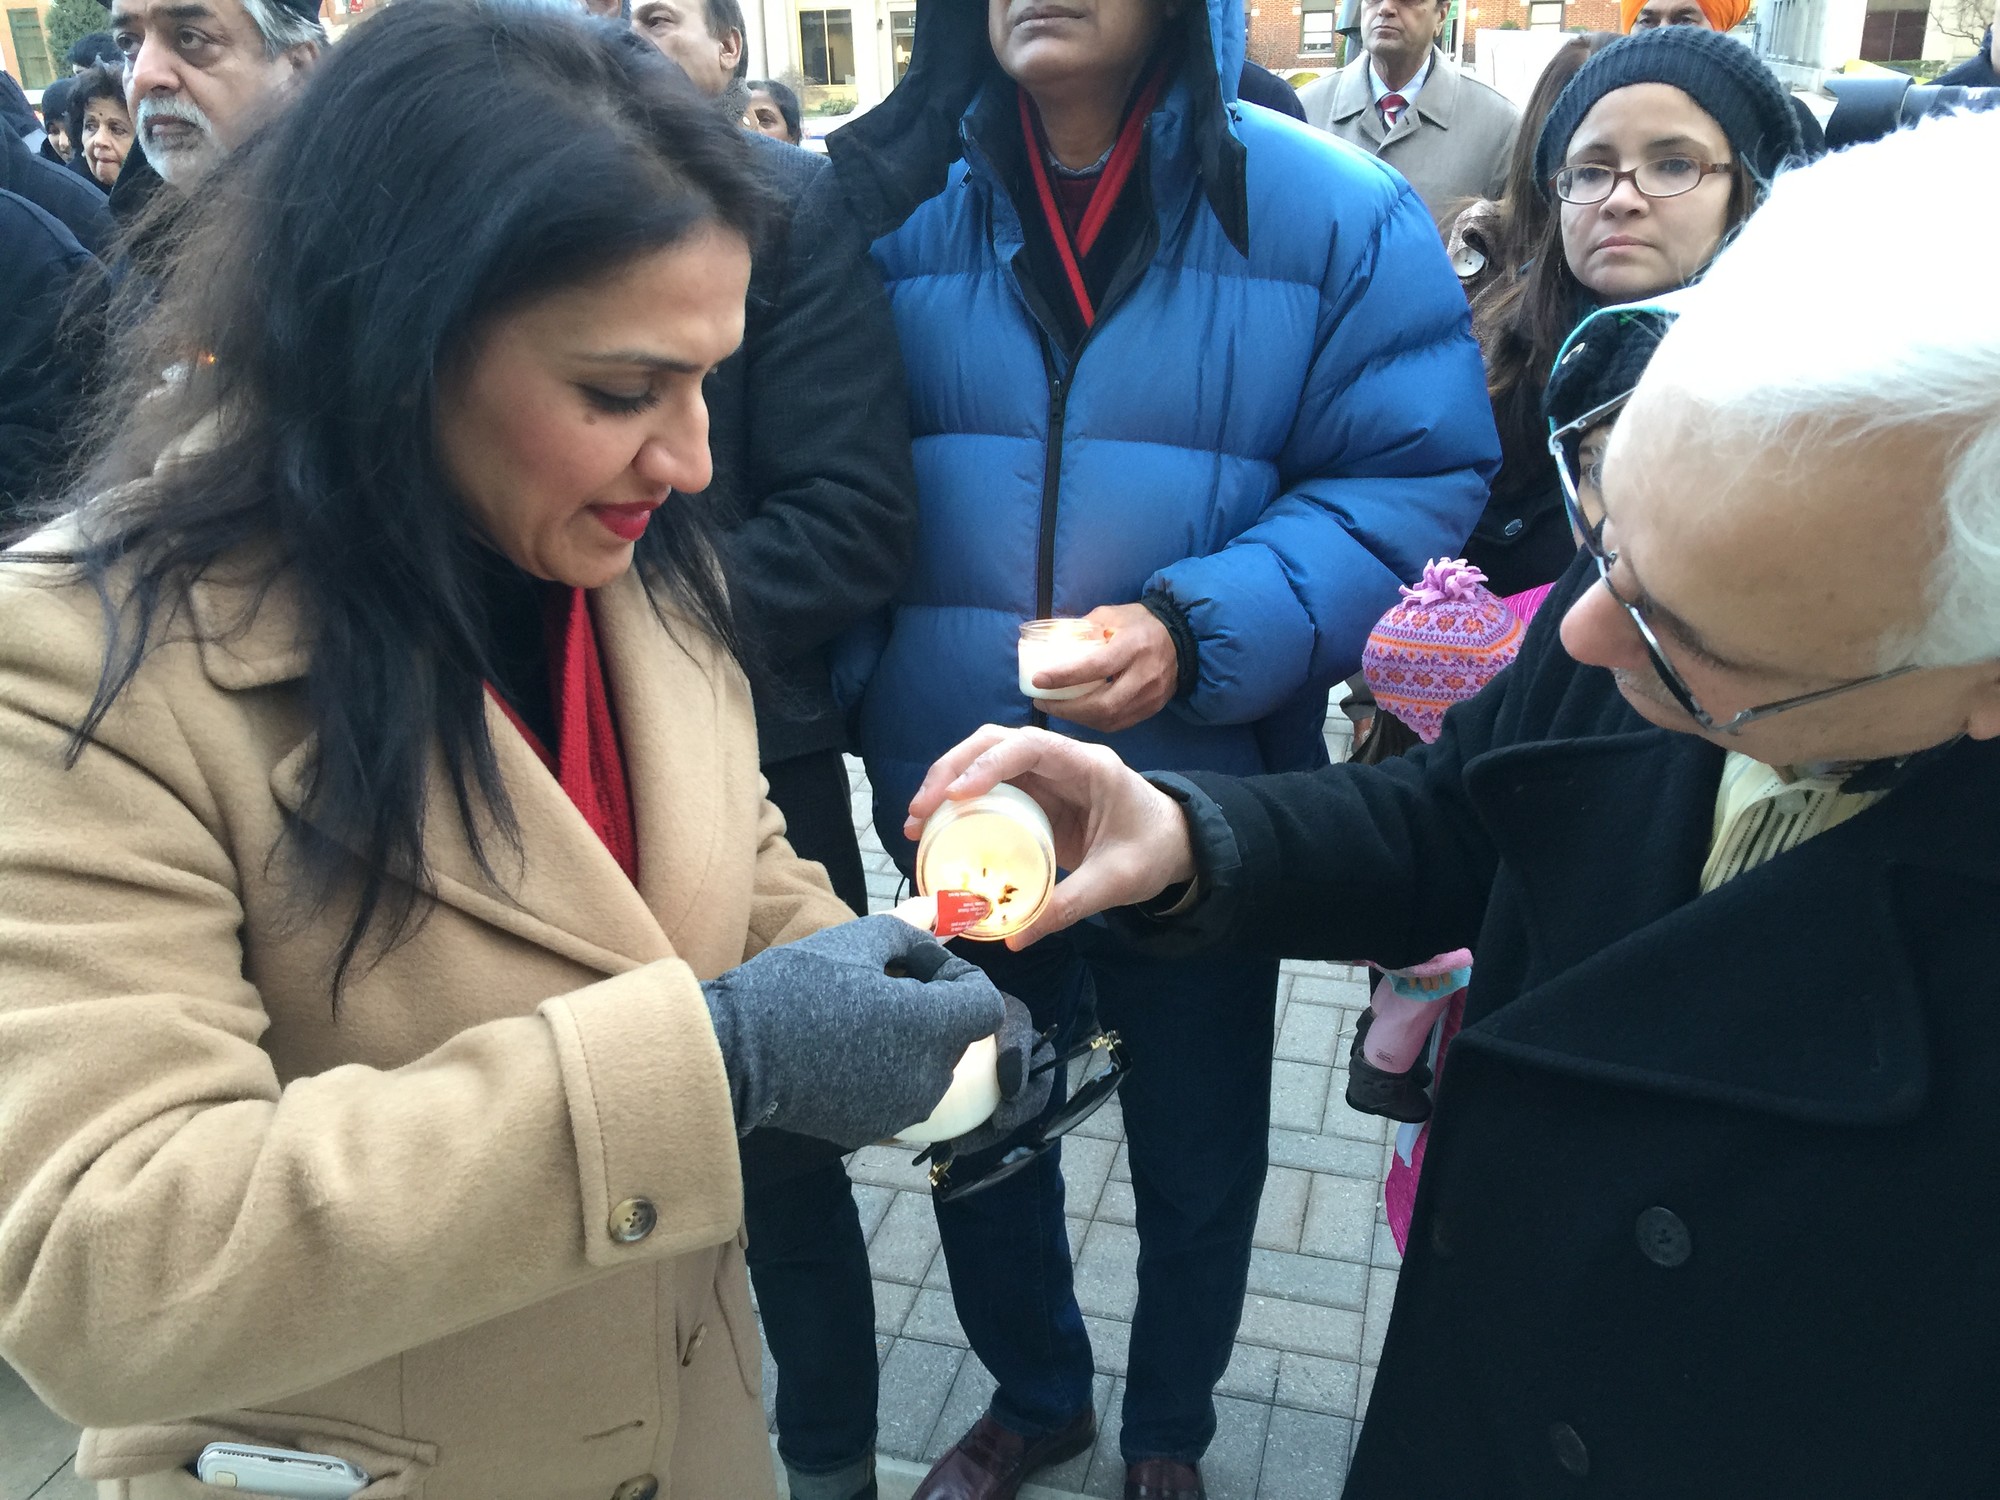 Jaweria Mirza, left, helped Dr. Tamkeen Ahmed light his candle before the ceremony began.